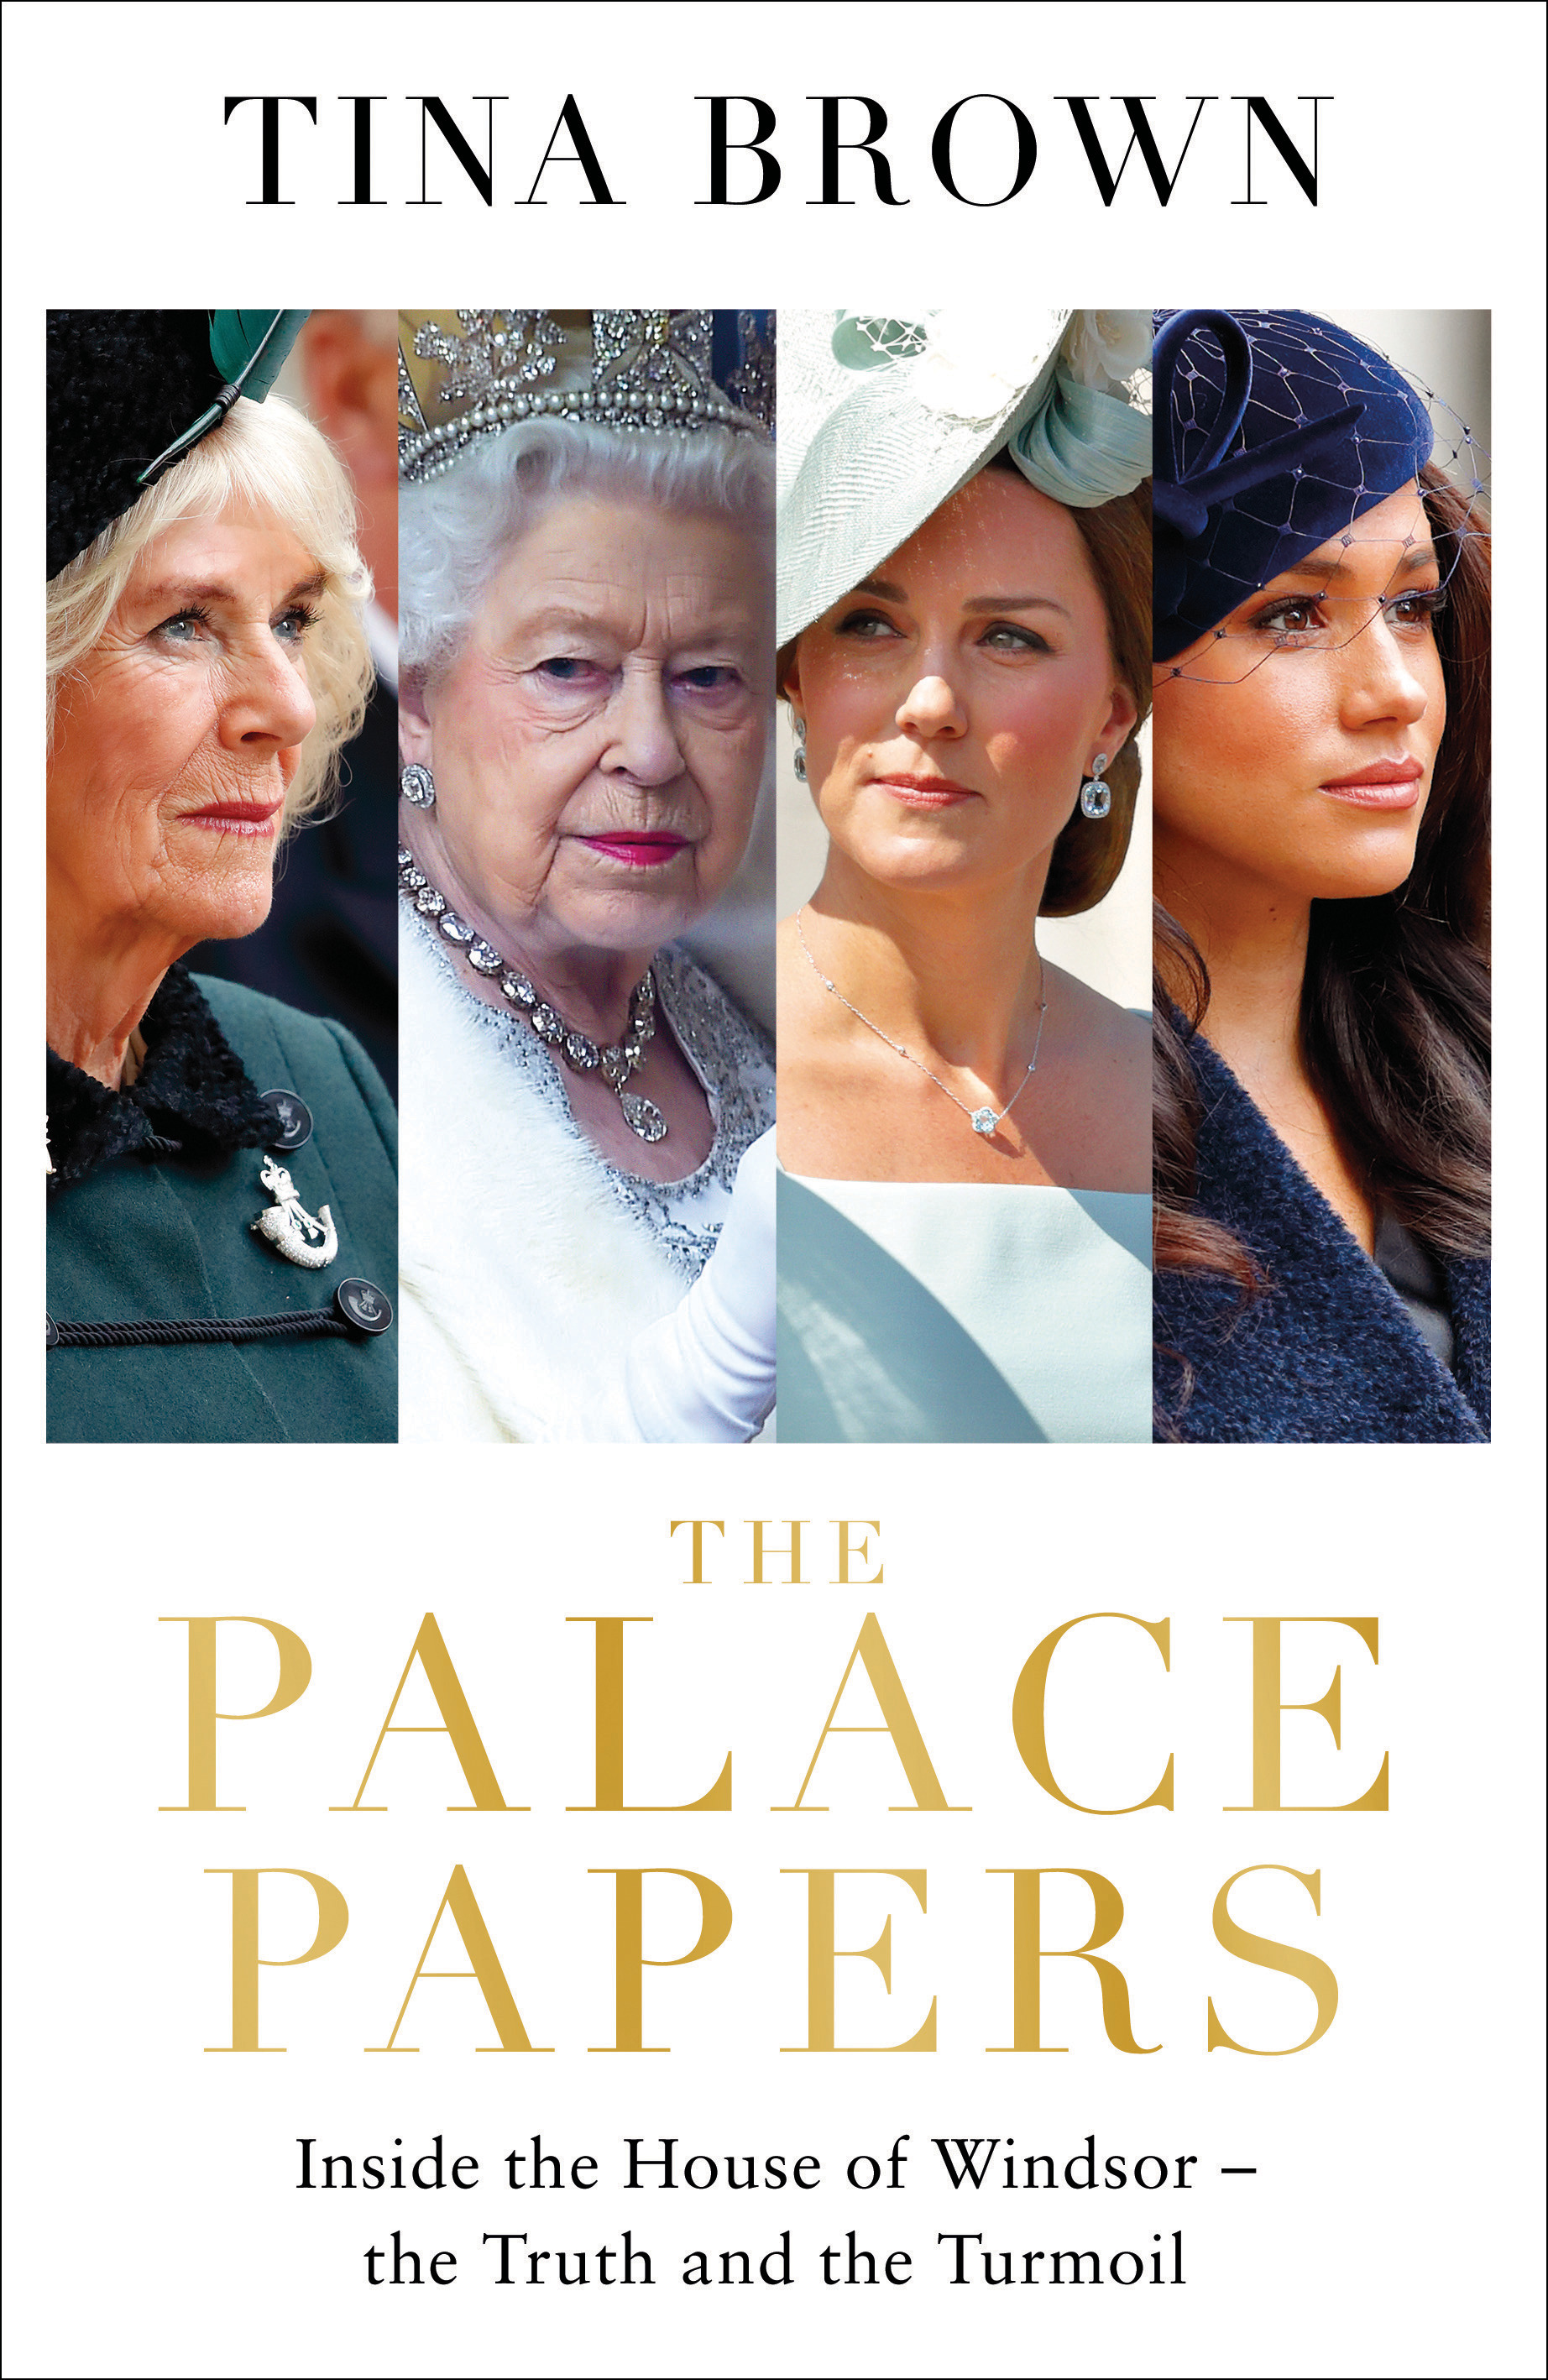 The Palace Papers : Inside the House of Windsor--the Truth and the Turmoil | Biography & Memoir